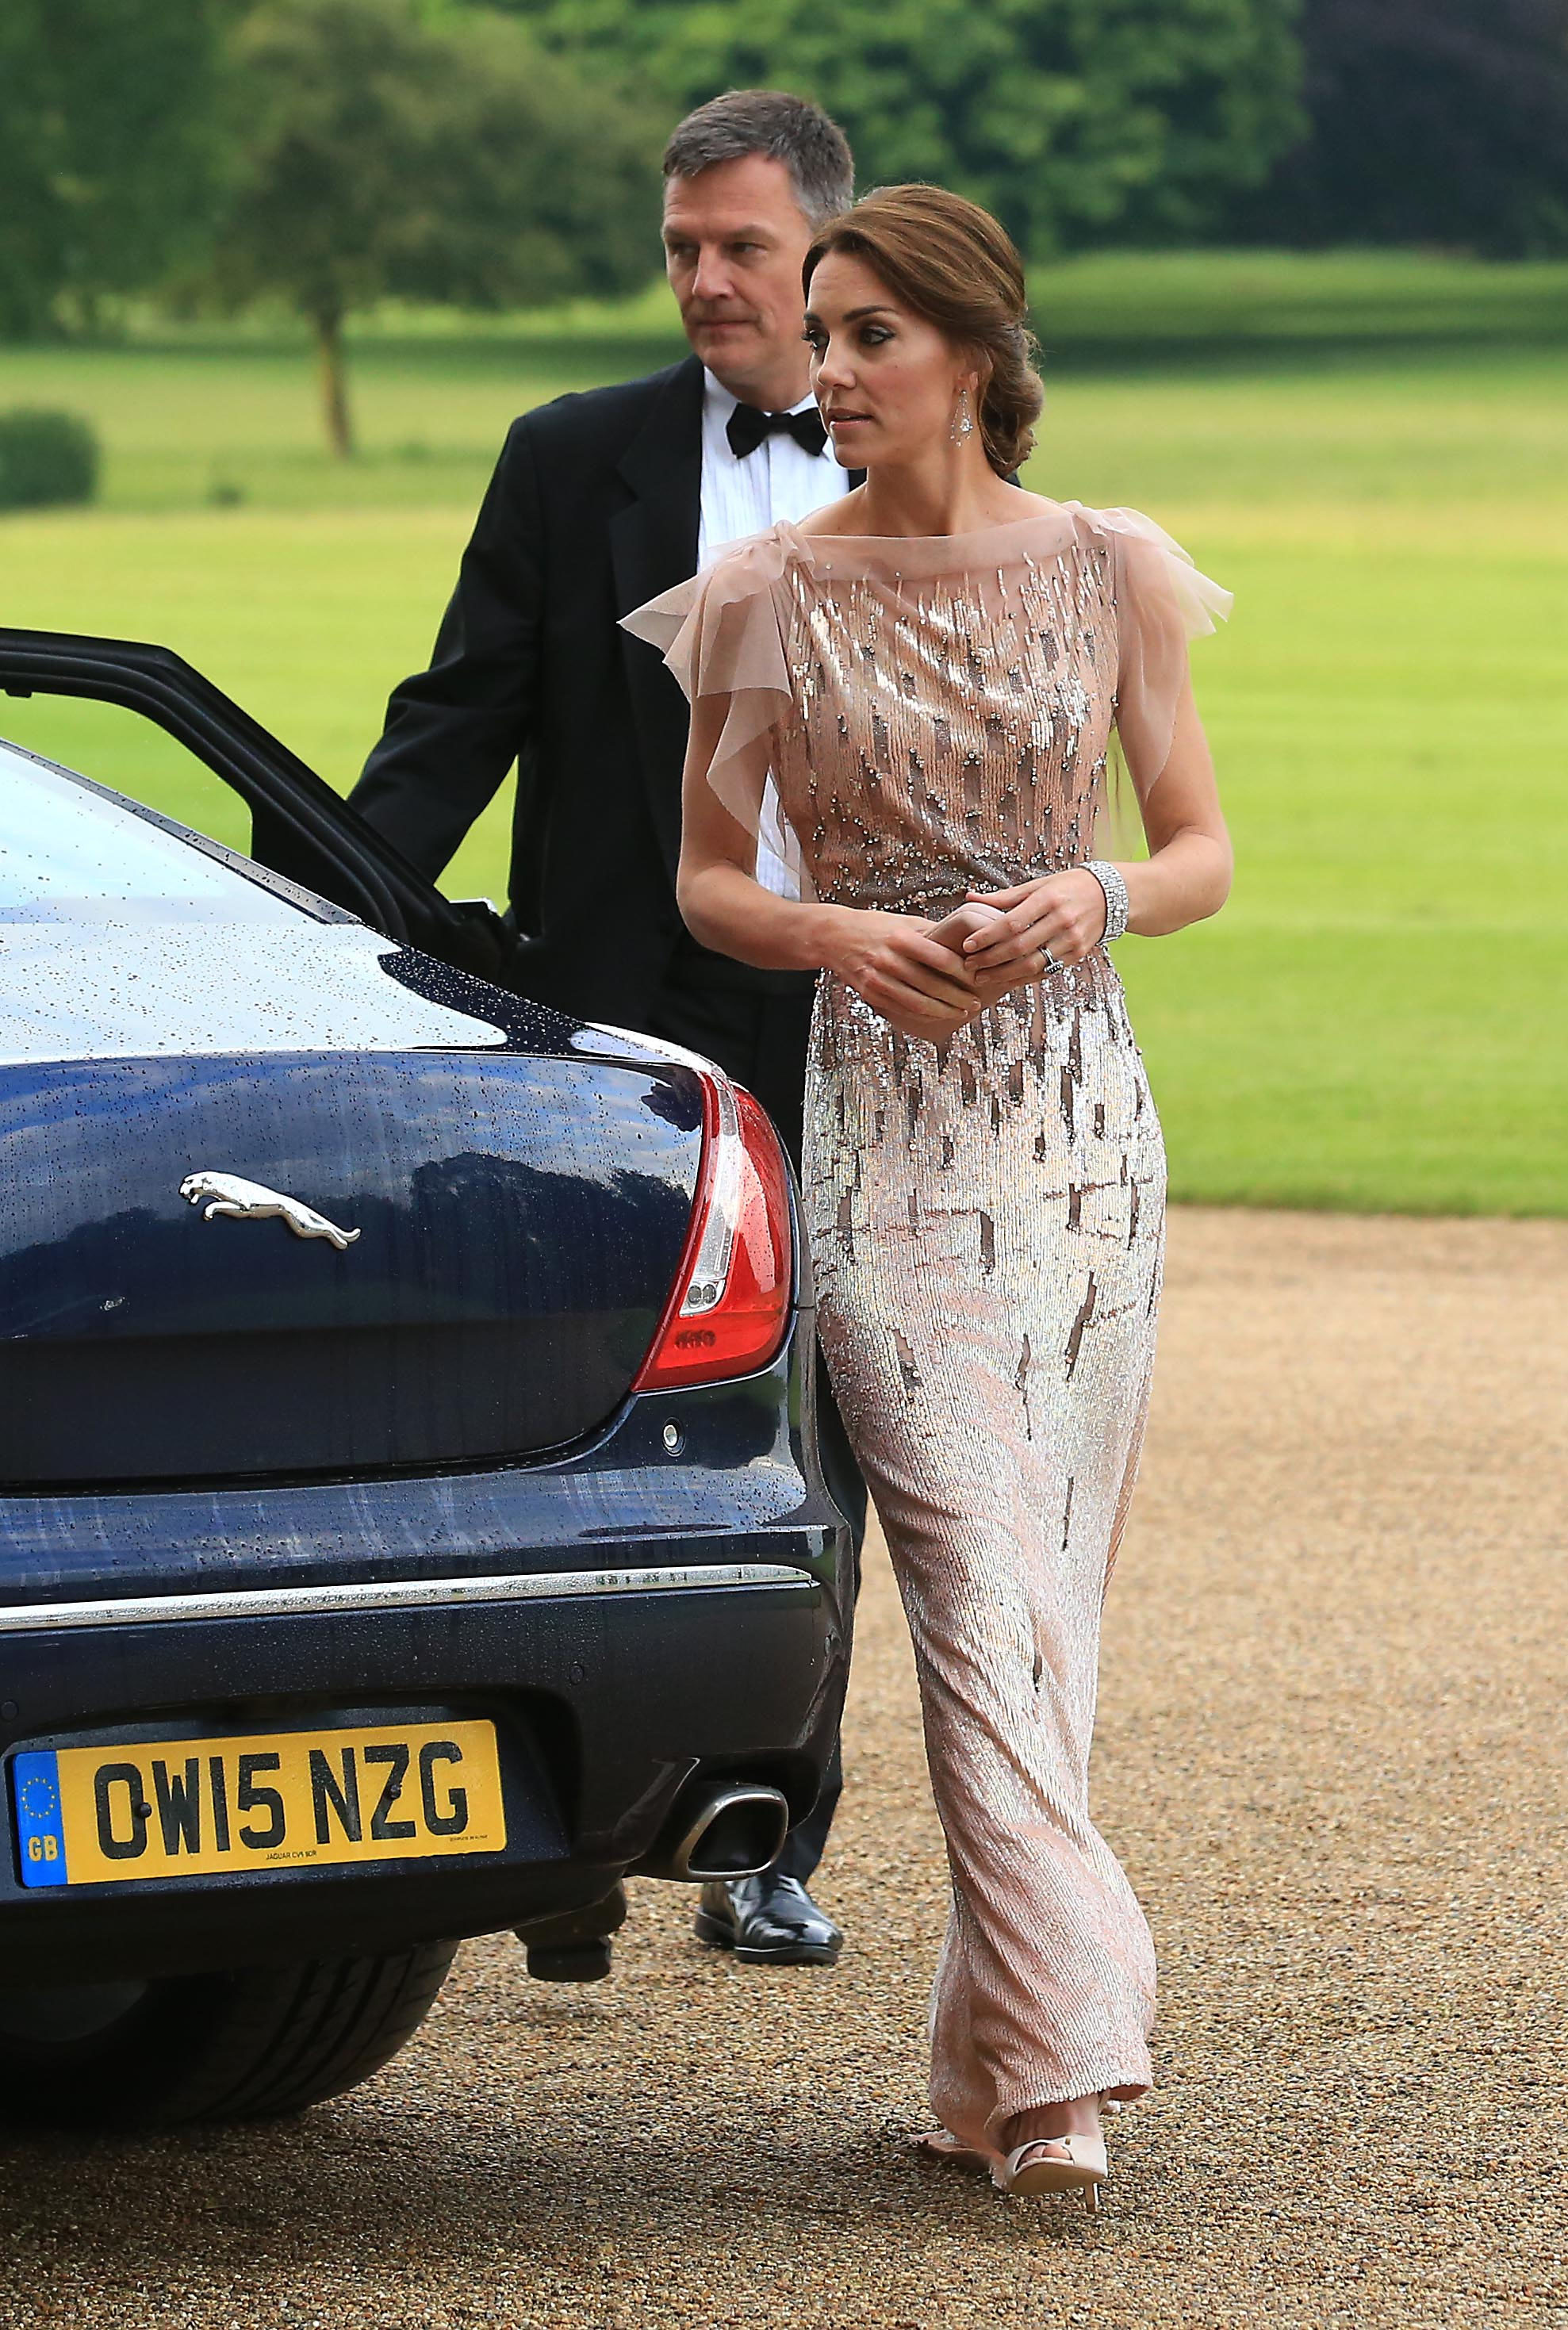 Catherine, Duchess of Cambridge, attends a gala dinner in support of East Anglia's Children's Hospices' nook appeal at Houghton Hall in King's Lynn, England, on June 22, 2016.